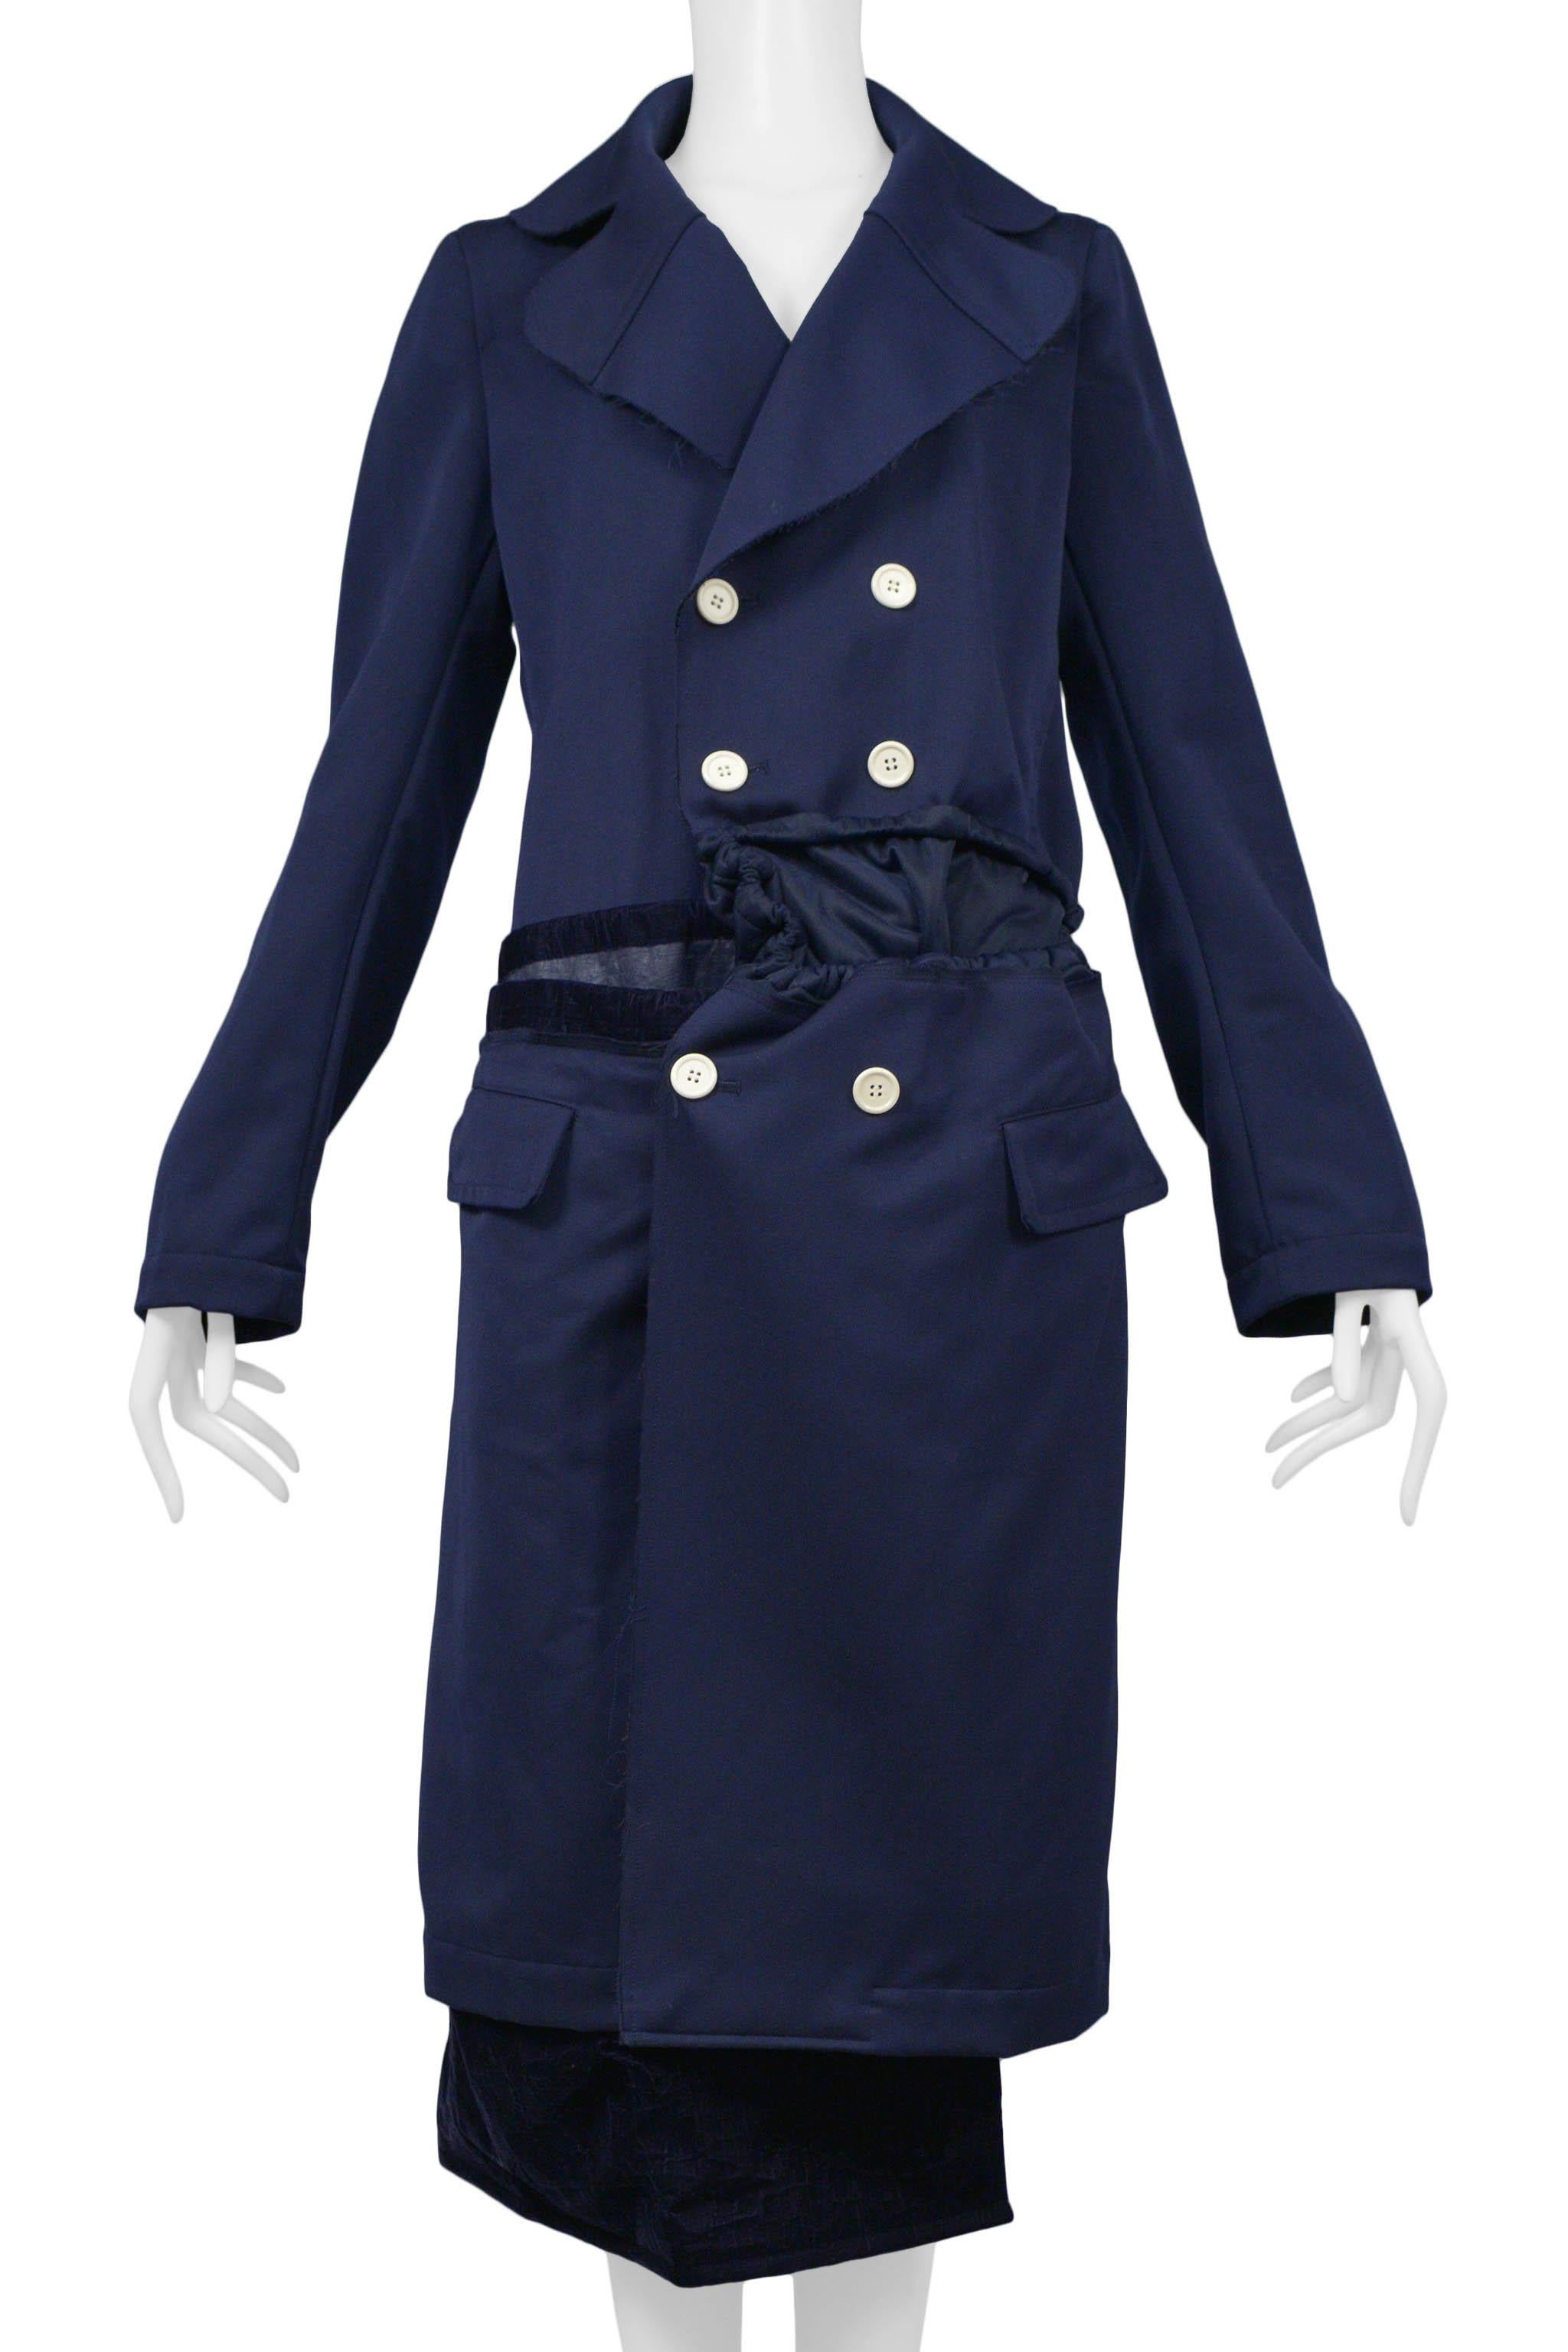 Resurrection Vintage is excited to offer a vintage Comme des Garcons blue coat featuring a double-breasted front with white buttons, wide lapels, drawstrings, and velvet insets and trim.

Comme Des Garcons
Size: Medium 
Fabric: 100% Polyester
2008